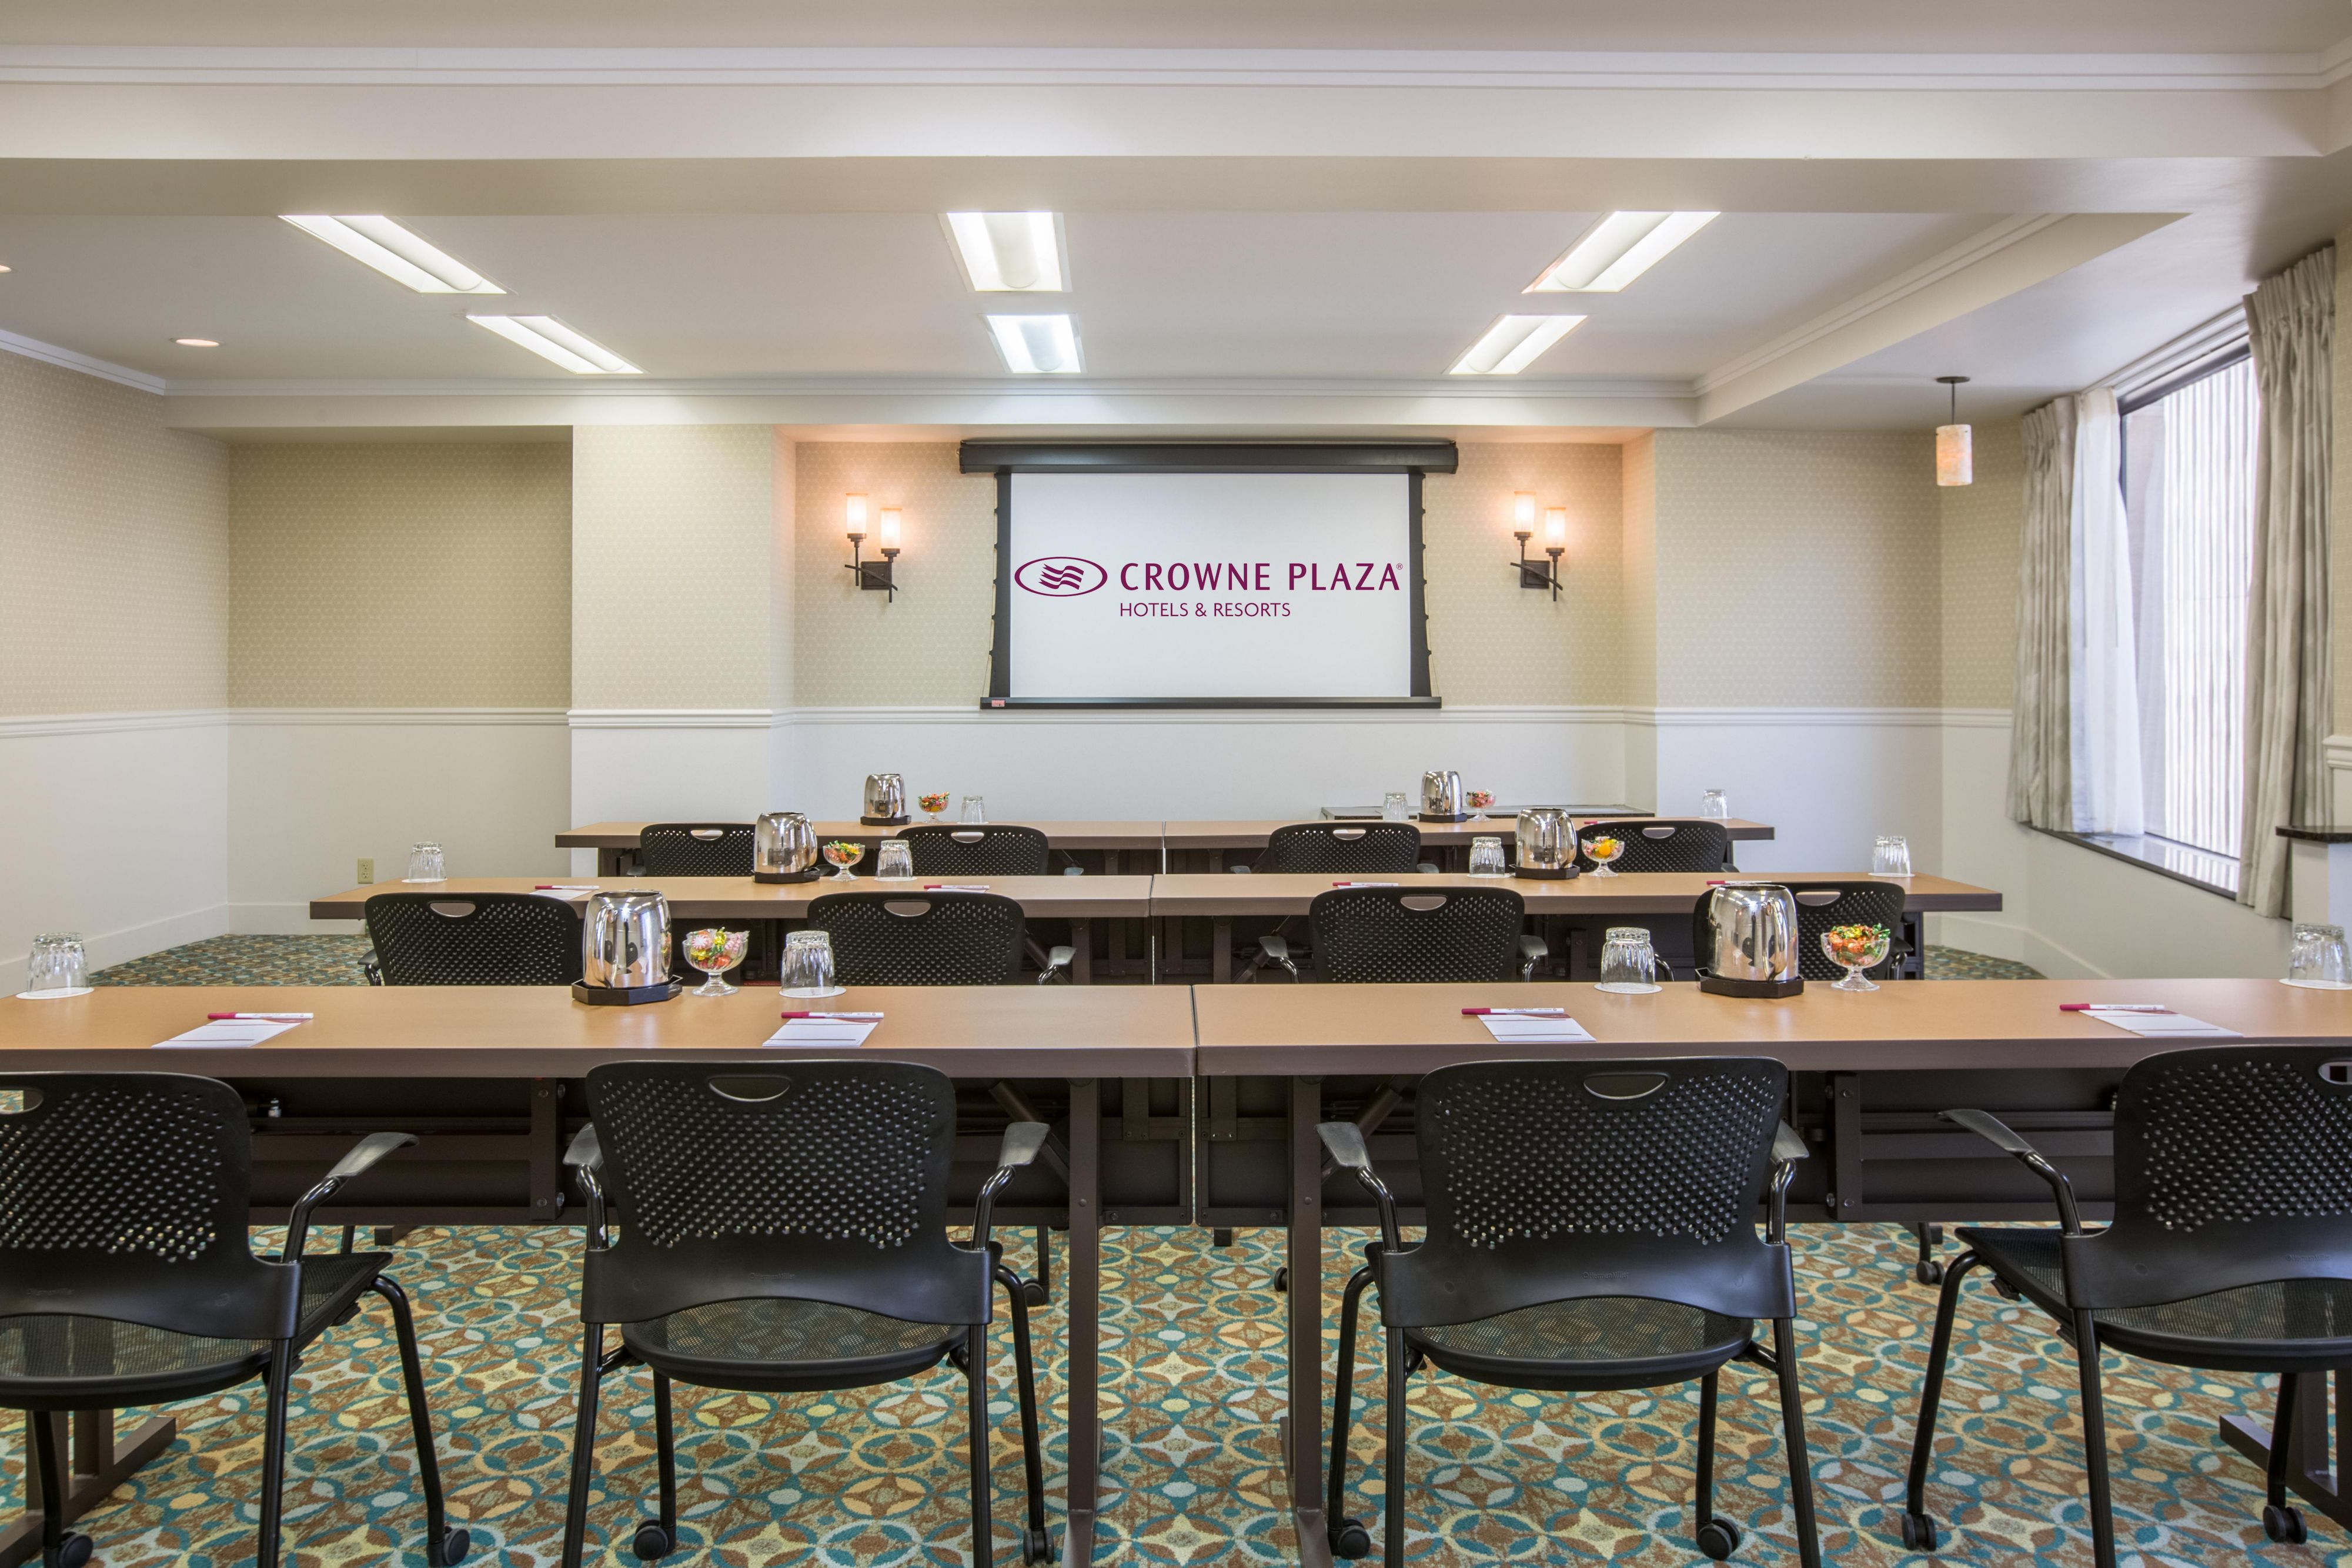 Classroom style is perfect for your next big conference.